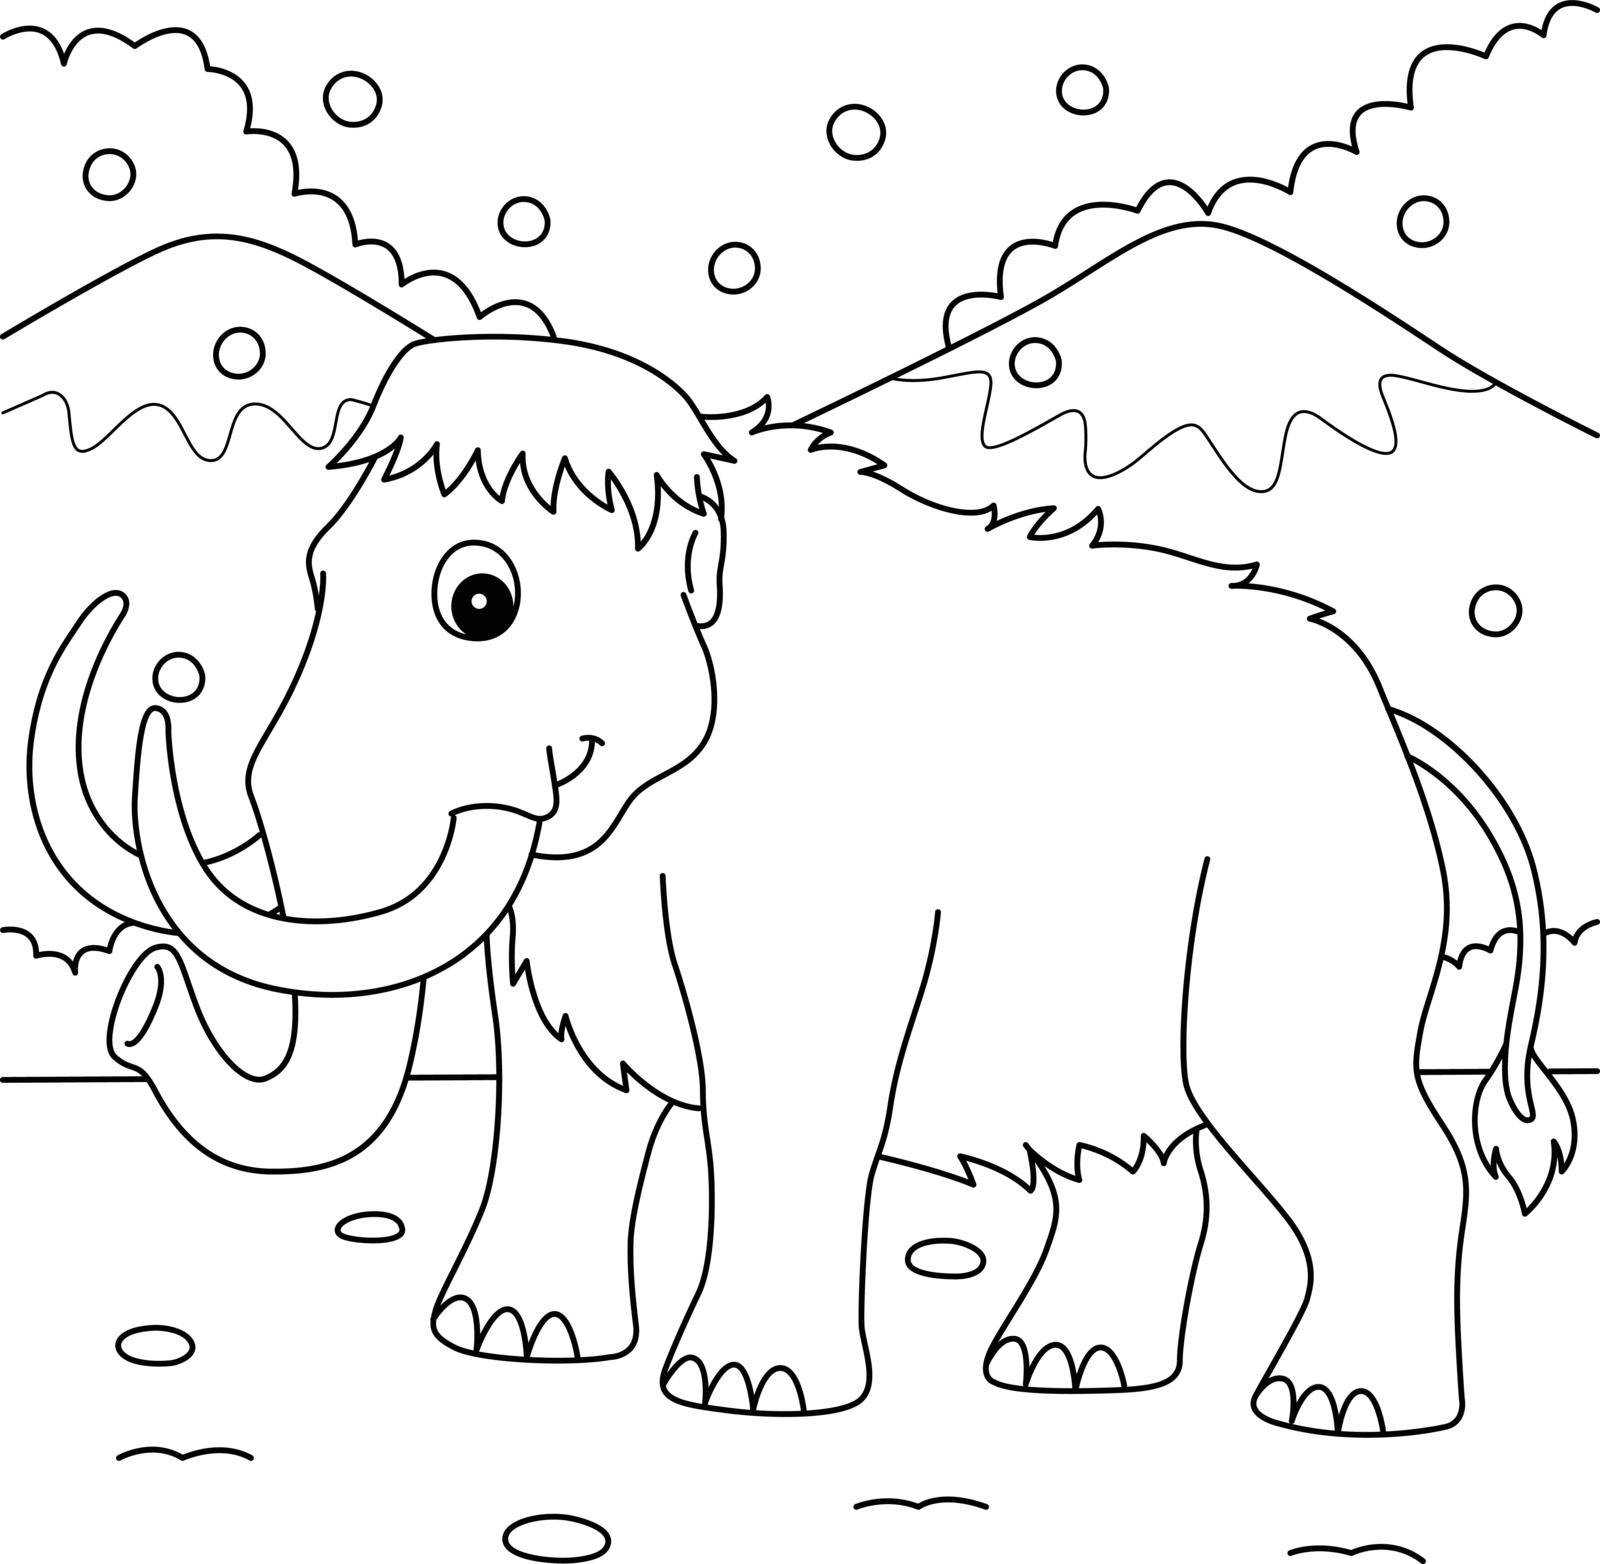 A cute and funny coloring page of a Mammoth Animal. Provides hours of coloring fun for children. Color, this page is very easy. Suitable for little kids and toddlers.